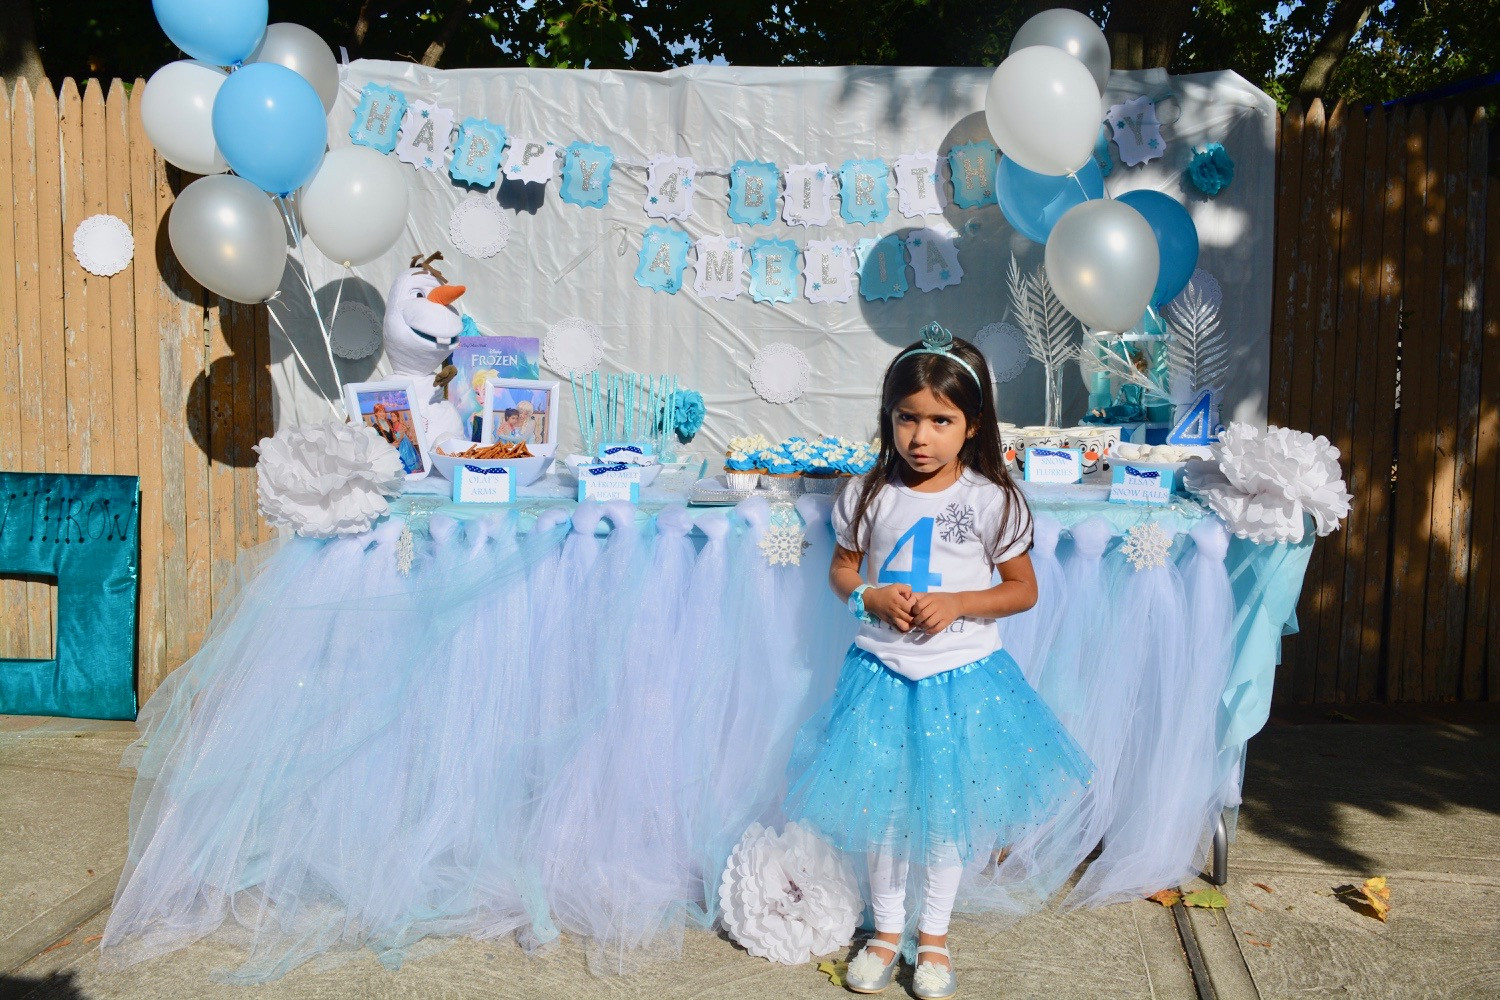 Frozen Birthday Decoration Ideas
 How to Prep the Ultimate Frozen Themed Birthday Party